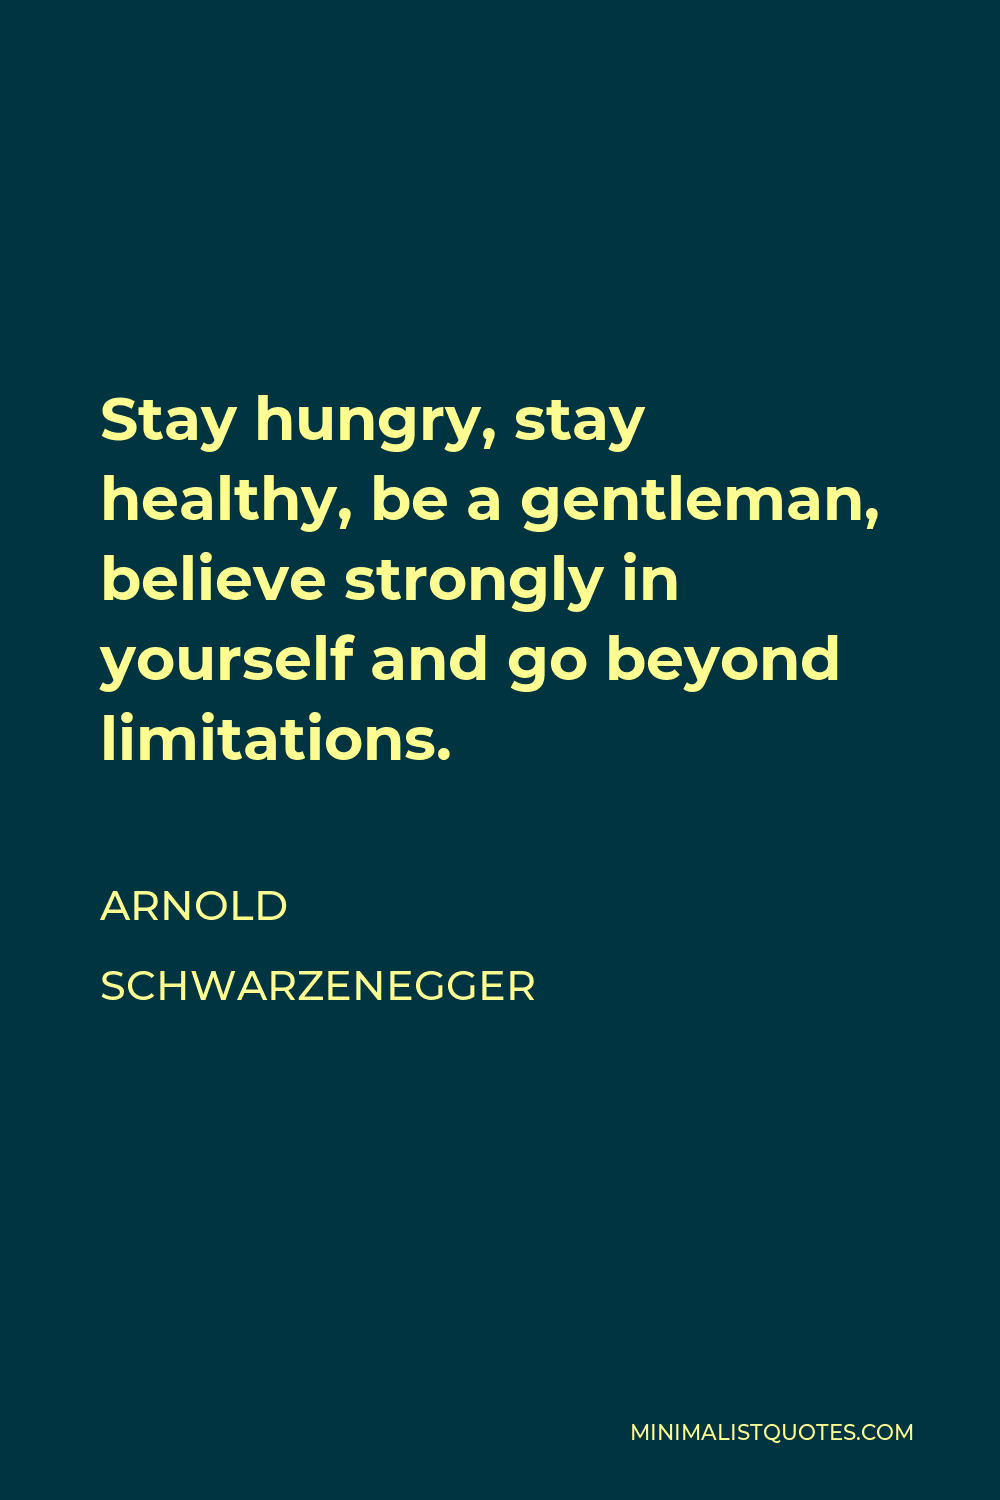 Arnold Schwarzenegger Quote - Stay hungry, stay healthy, be a gentleman, believe strongly in yourself and go beyond limitations.